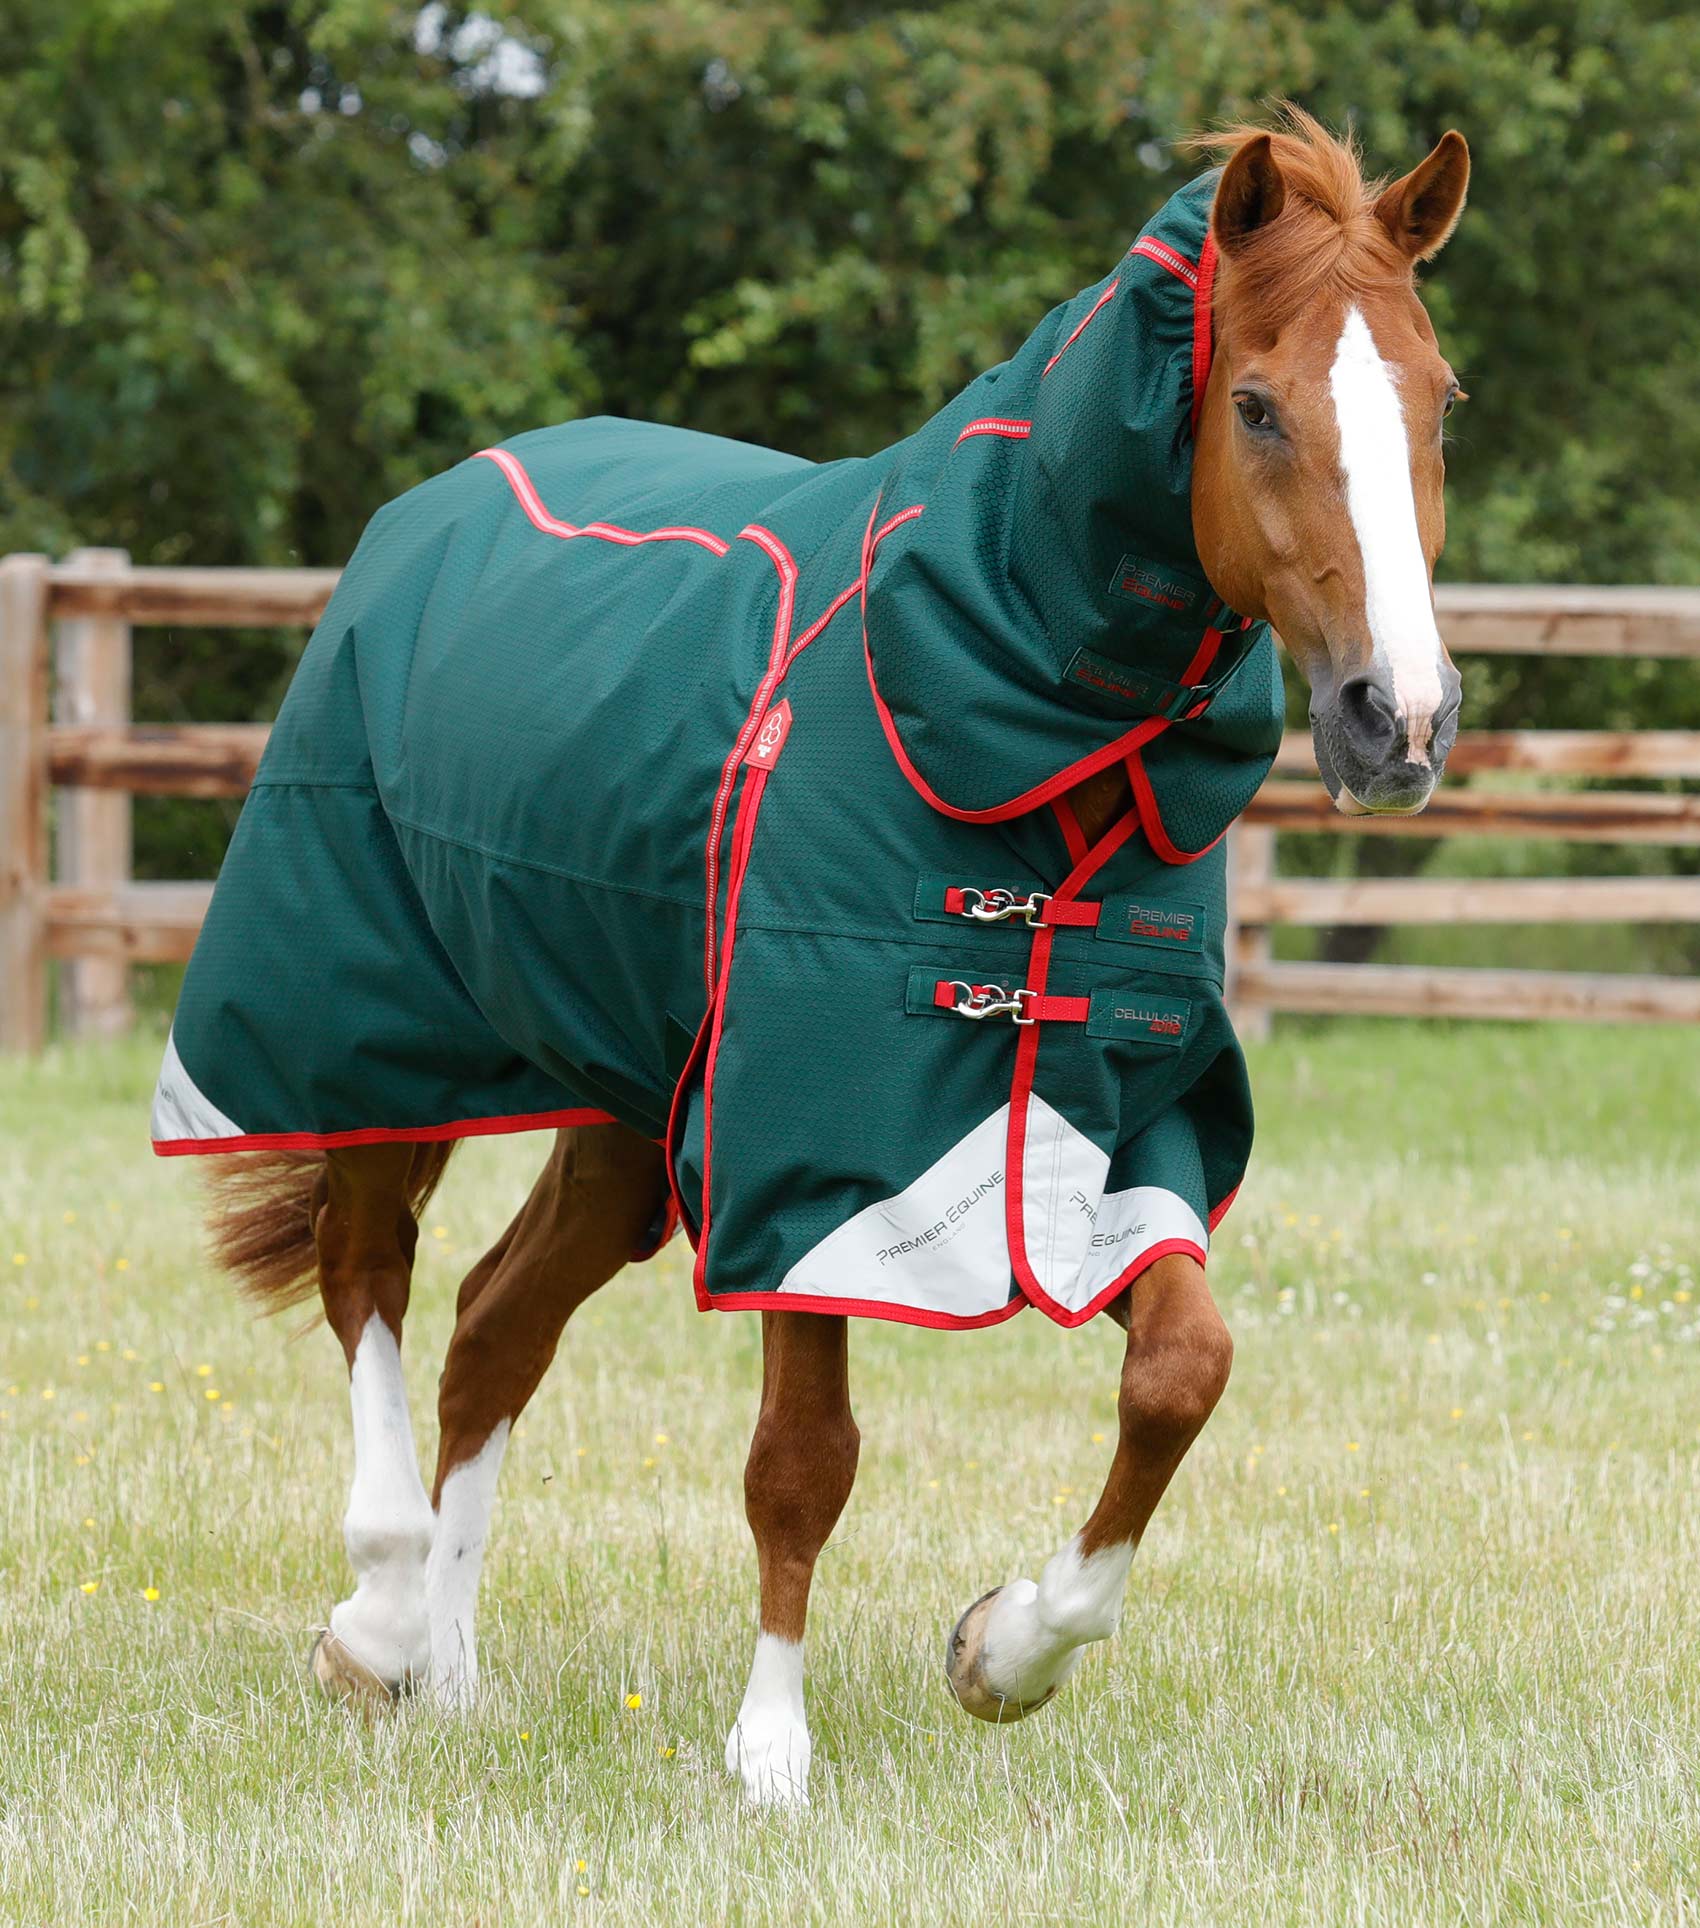 Description:Cellular Zone 250 Turnout Rug with Neck Cover_Color:Green_Position:1